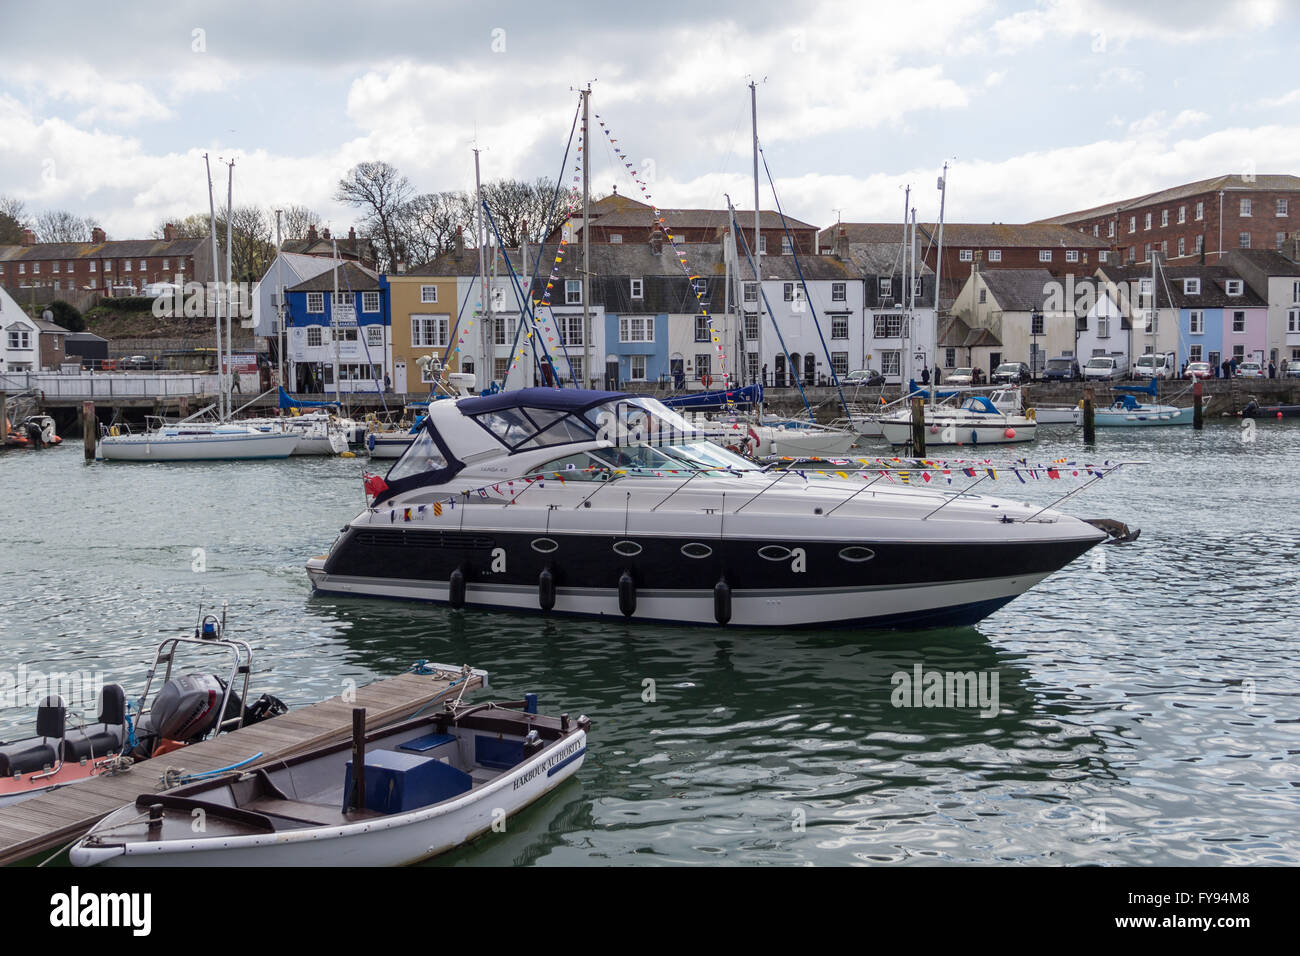 Weymouth, England. 23 April 2016. Queen's 90th Birthday Floating Tribute. Large cruiser in harbour. Credit:  Frances Underwood/Alamy Live News Stock Photo